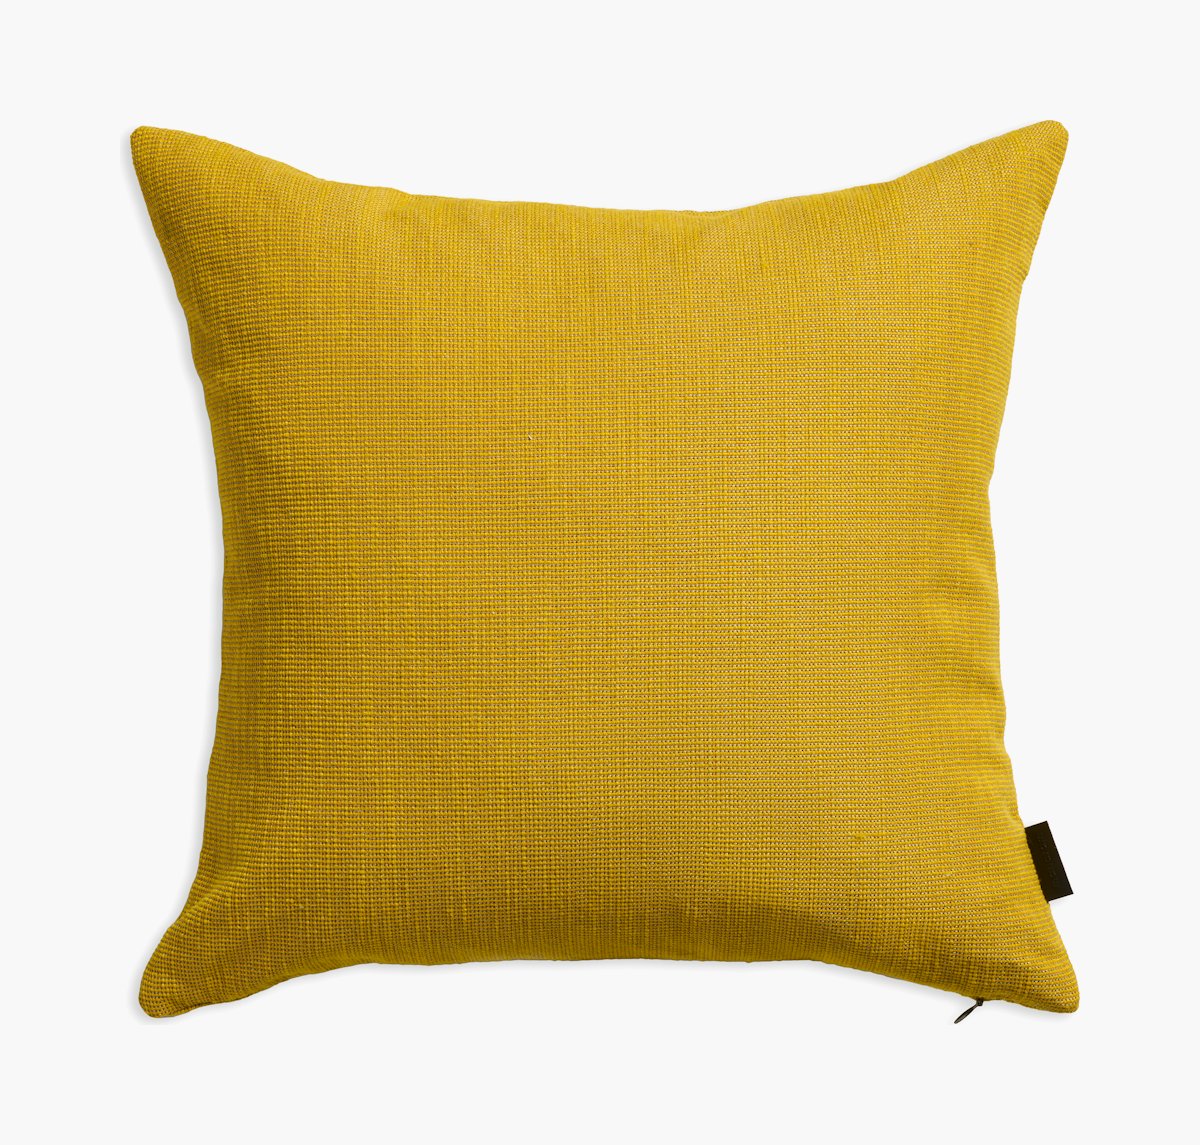 Paul Smith Ribbed Weave Indoor/Outdoor Pillow